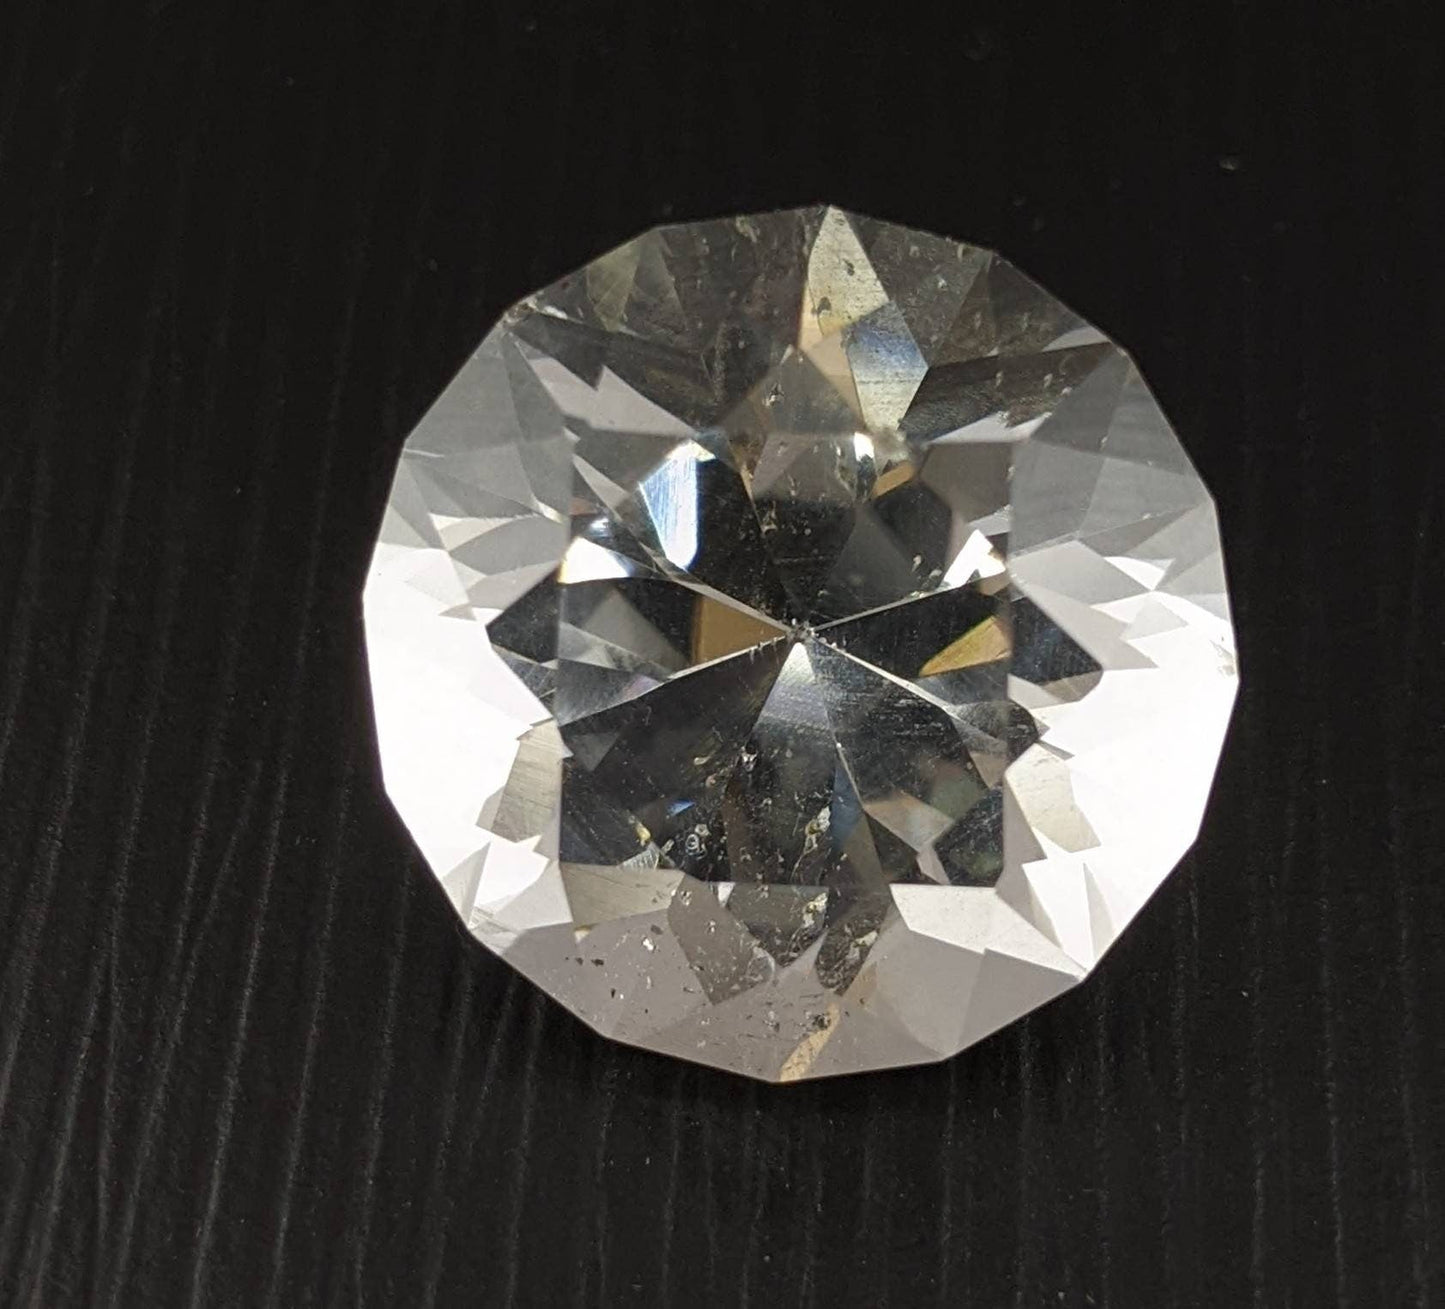 ARSAA GEMS AND MINERALSNatural fine quality beautiful 25.5 carats round cut shape good clarity Faceted Quartz gem - Premium  from ARSAA GEMS AND MINERALS - Just $25.00! Shop now at ARSAA GEMS AND MINERALS